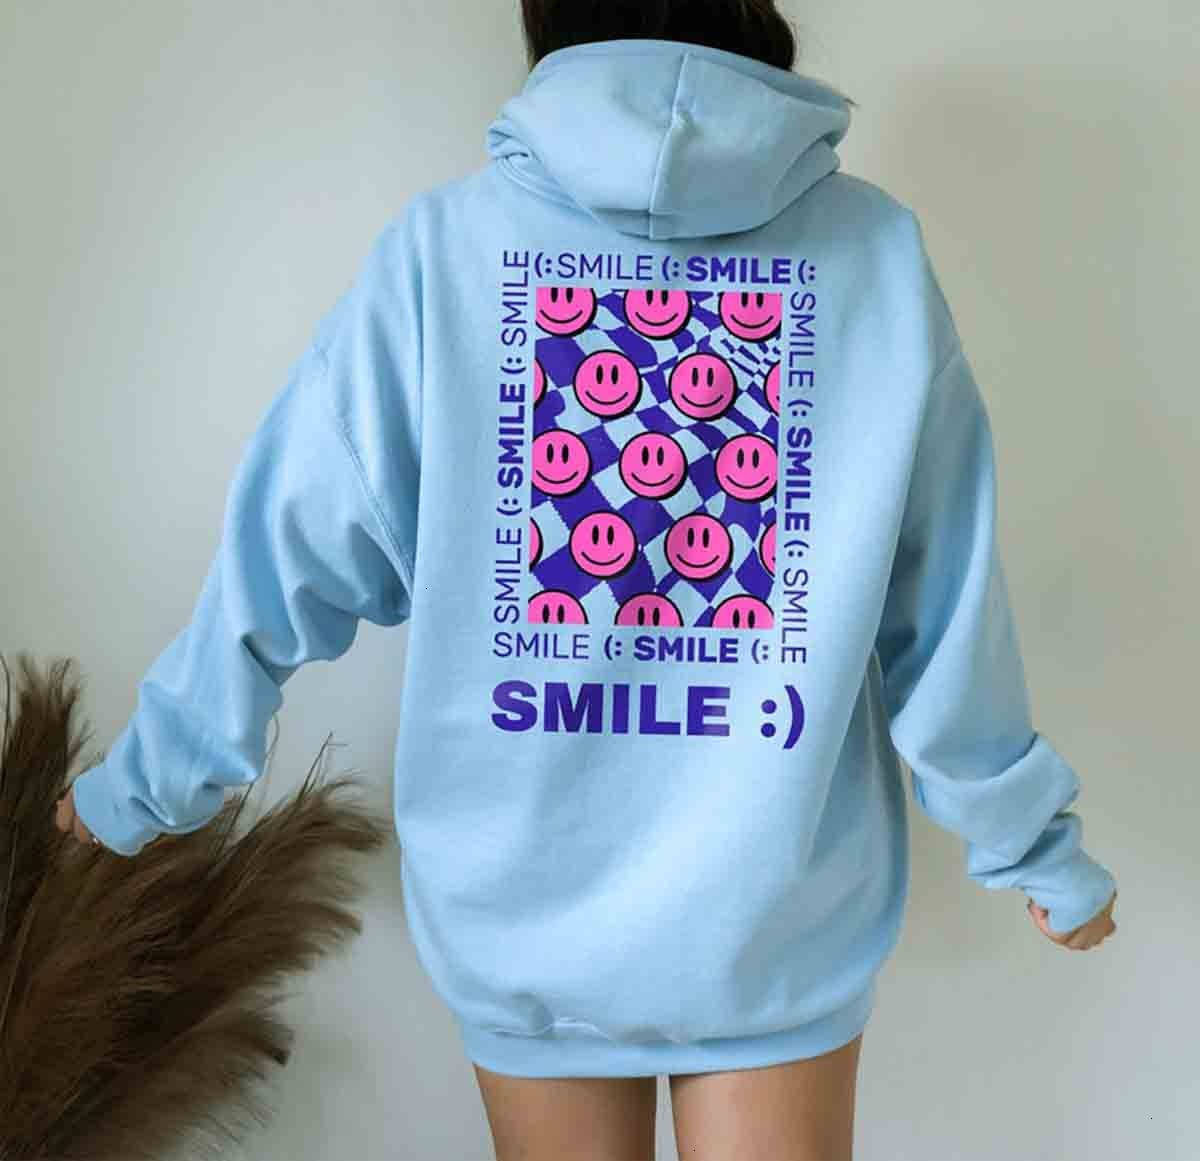 A Woman Wearing A Blue Hoodie With Smiles On It Wallpaper